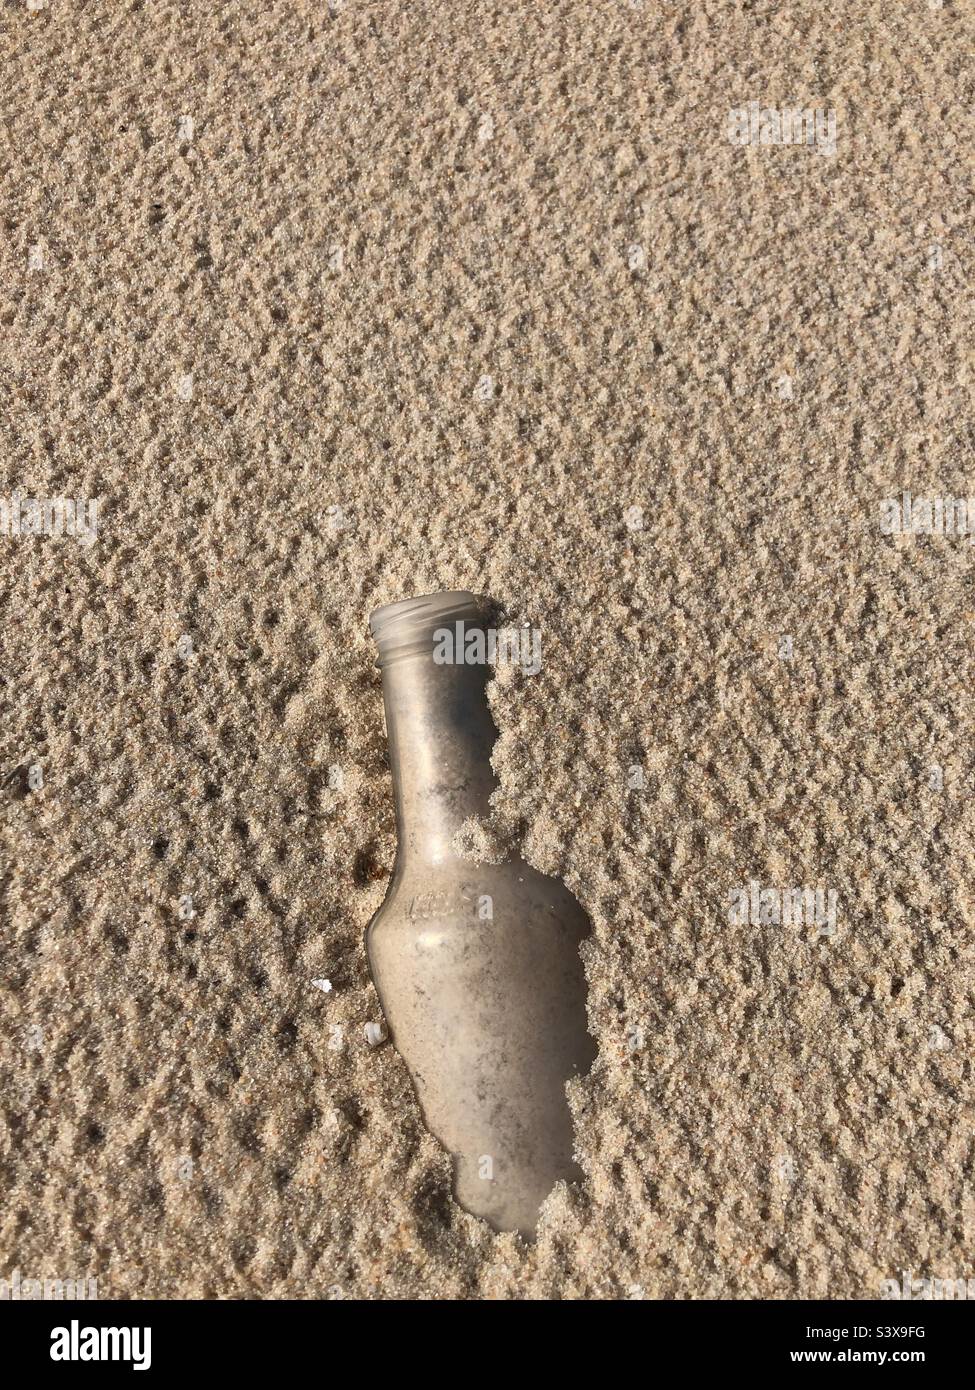 A bottle half buried in the sand. Stock Photo